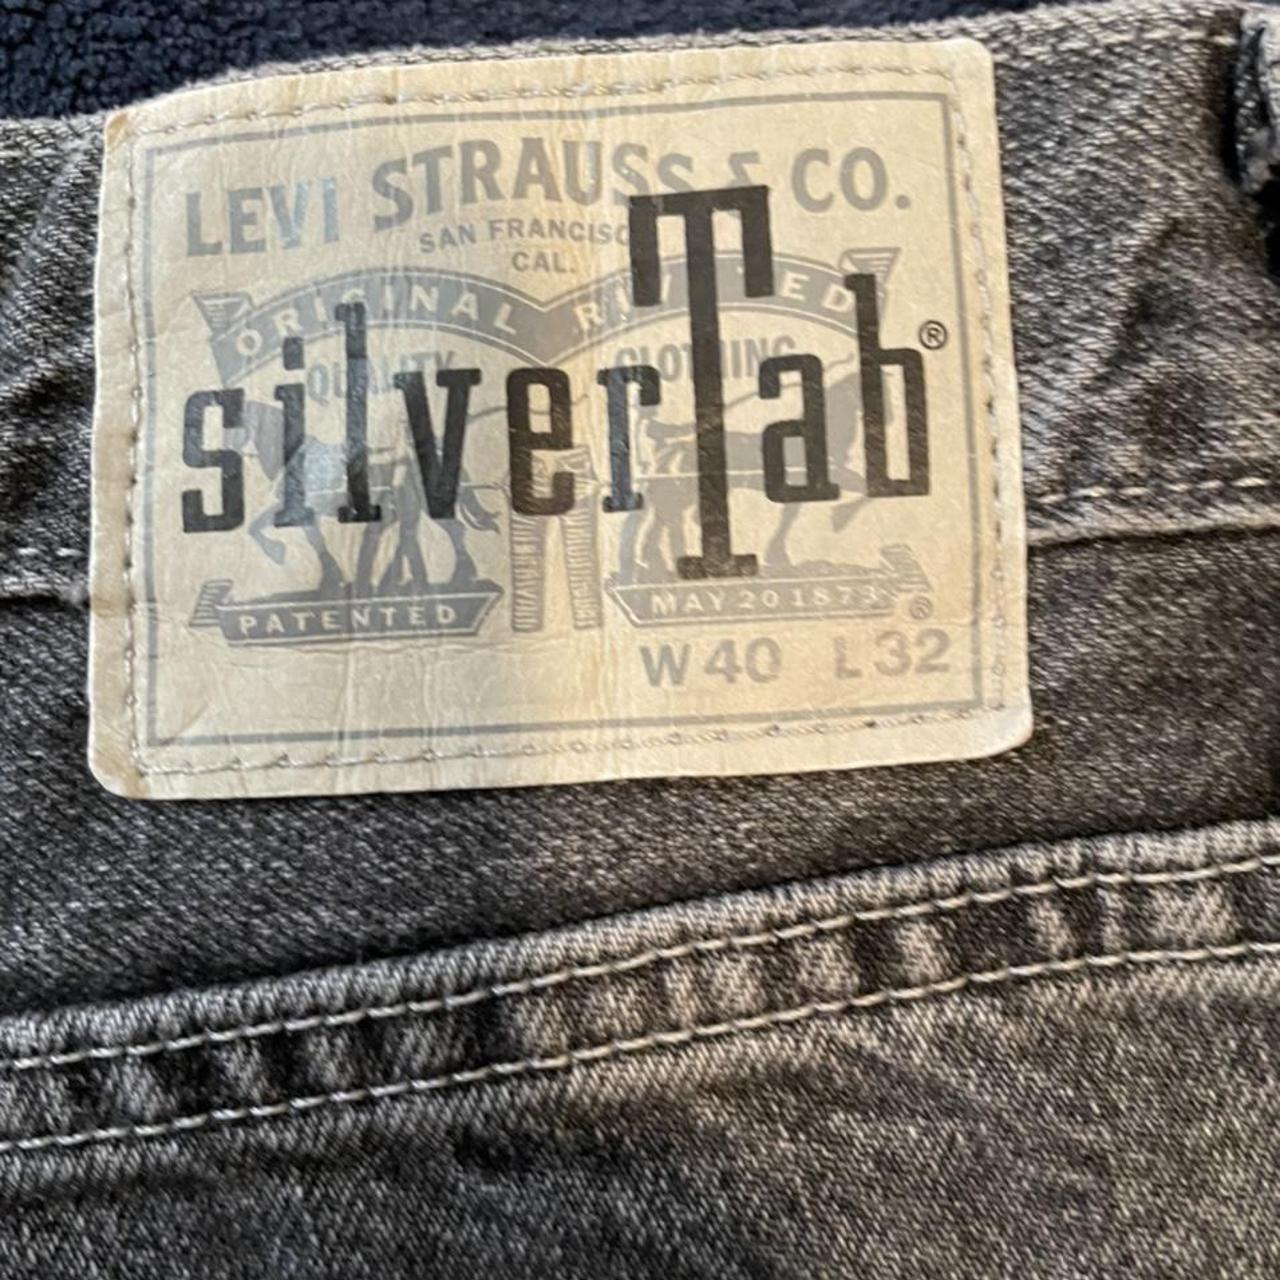 Product Image 3 - -Levi’s Silvertab “baggy” jeans from